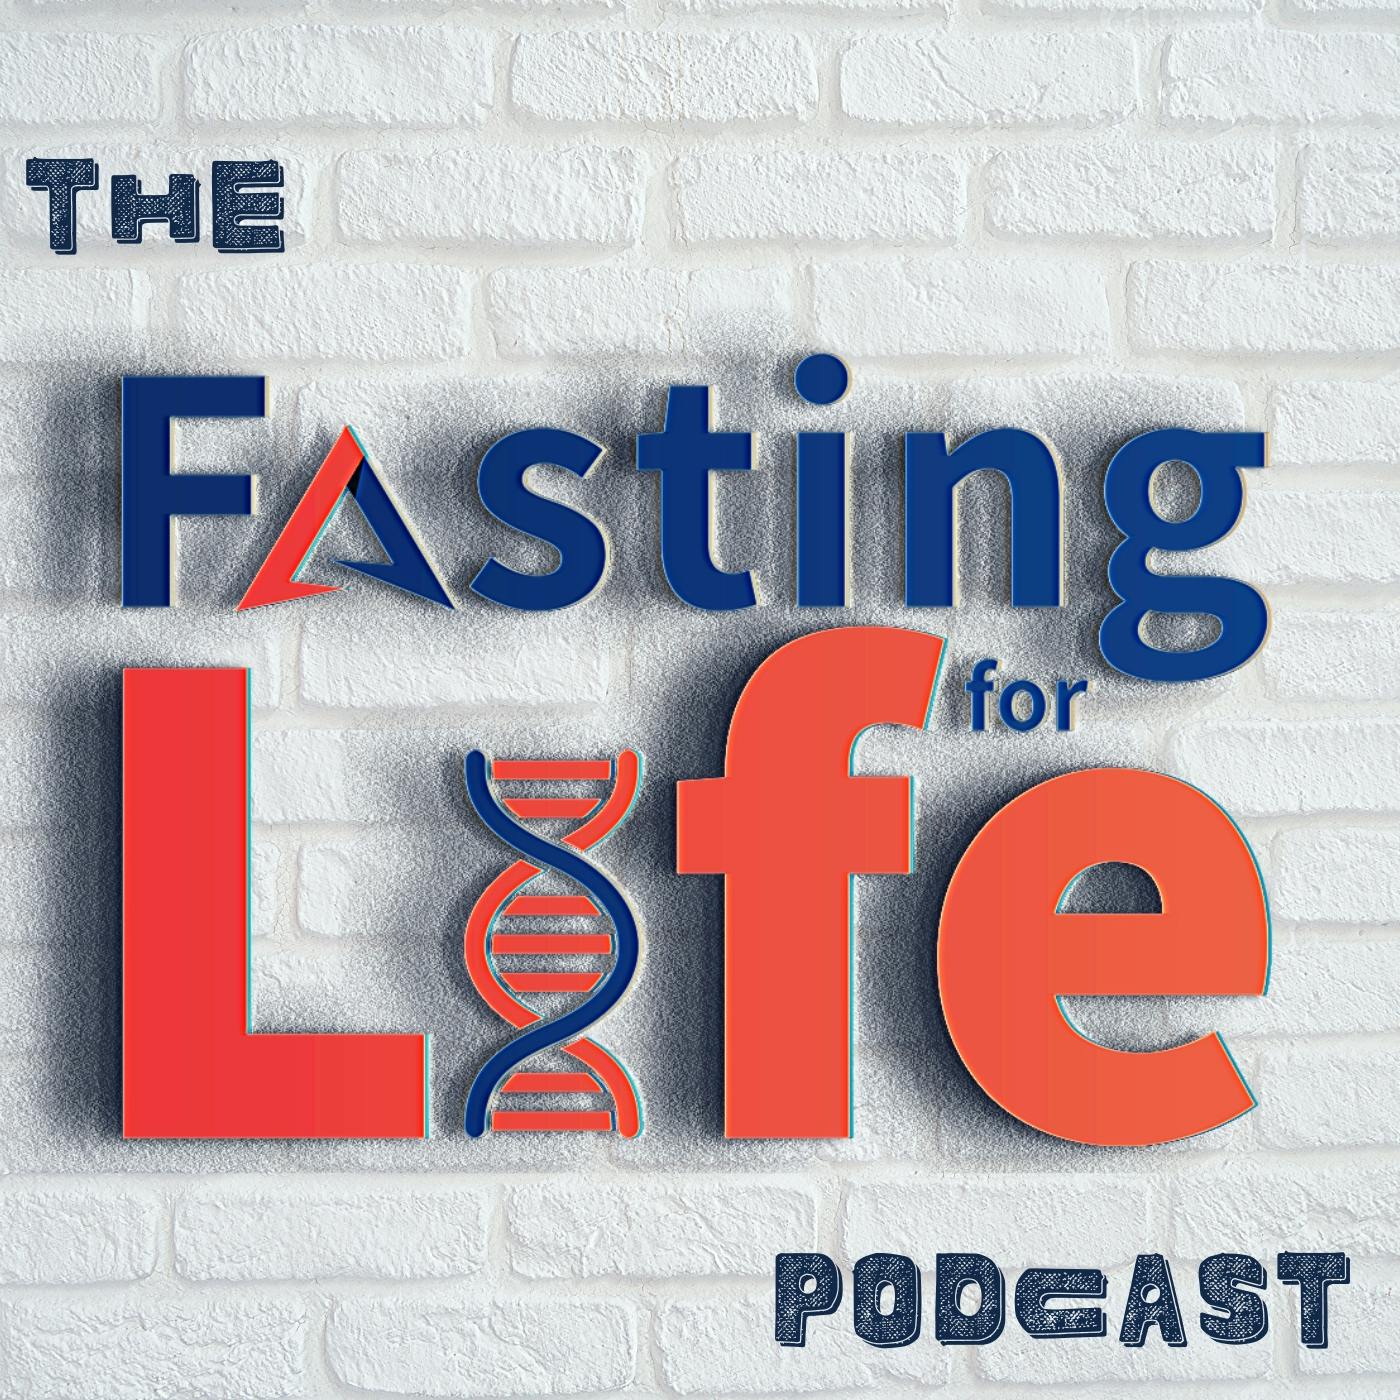 Ep. 71 - Quiz the Hosts Lightning Round! | Favorite Fasting Window, Favorite Fast-Breaking Food, Frustrating Set Points | How to decide when to do a longer fast? | Free One Meal a Day OMAD Intermitten